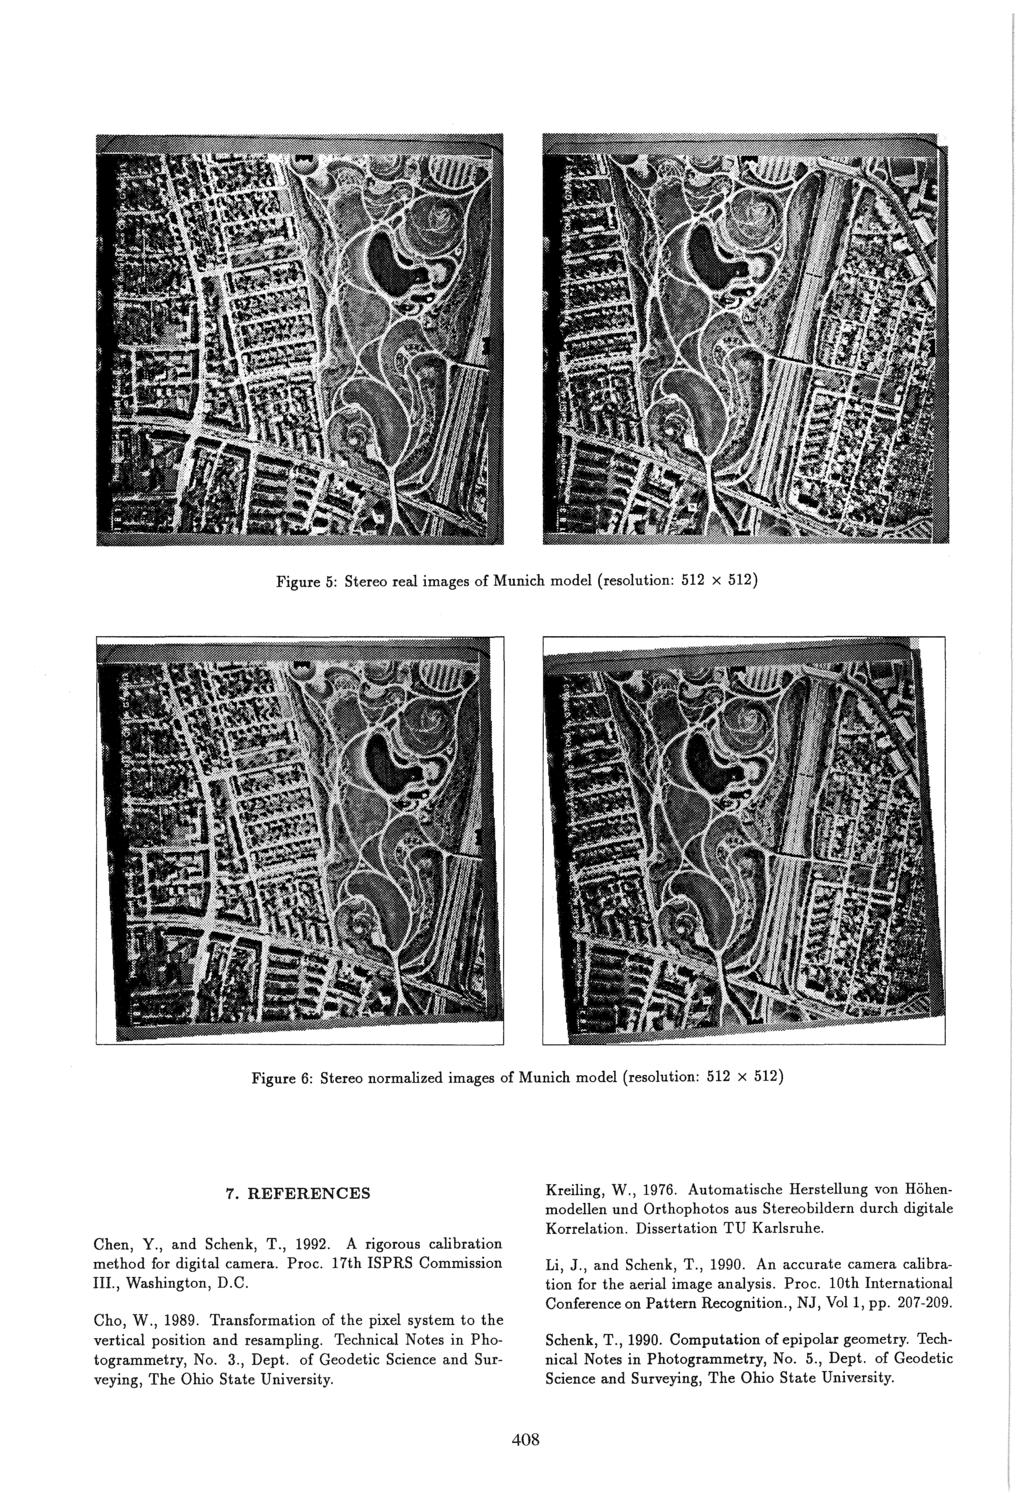 Figure 5: St.ereo real images of Munich model (resolution: 512 x 512) Figure 6: Stereo normalized images of Munich model (resolution: 512 x 512) 7. REFERENCES Chen, Y., and Schenk, T., 1992.